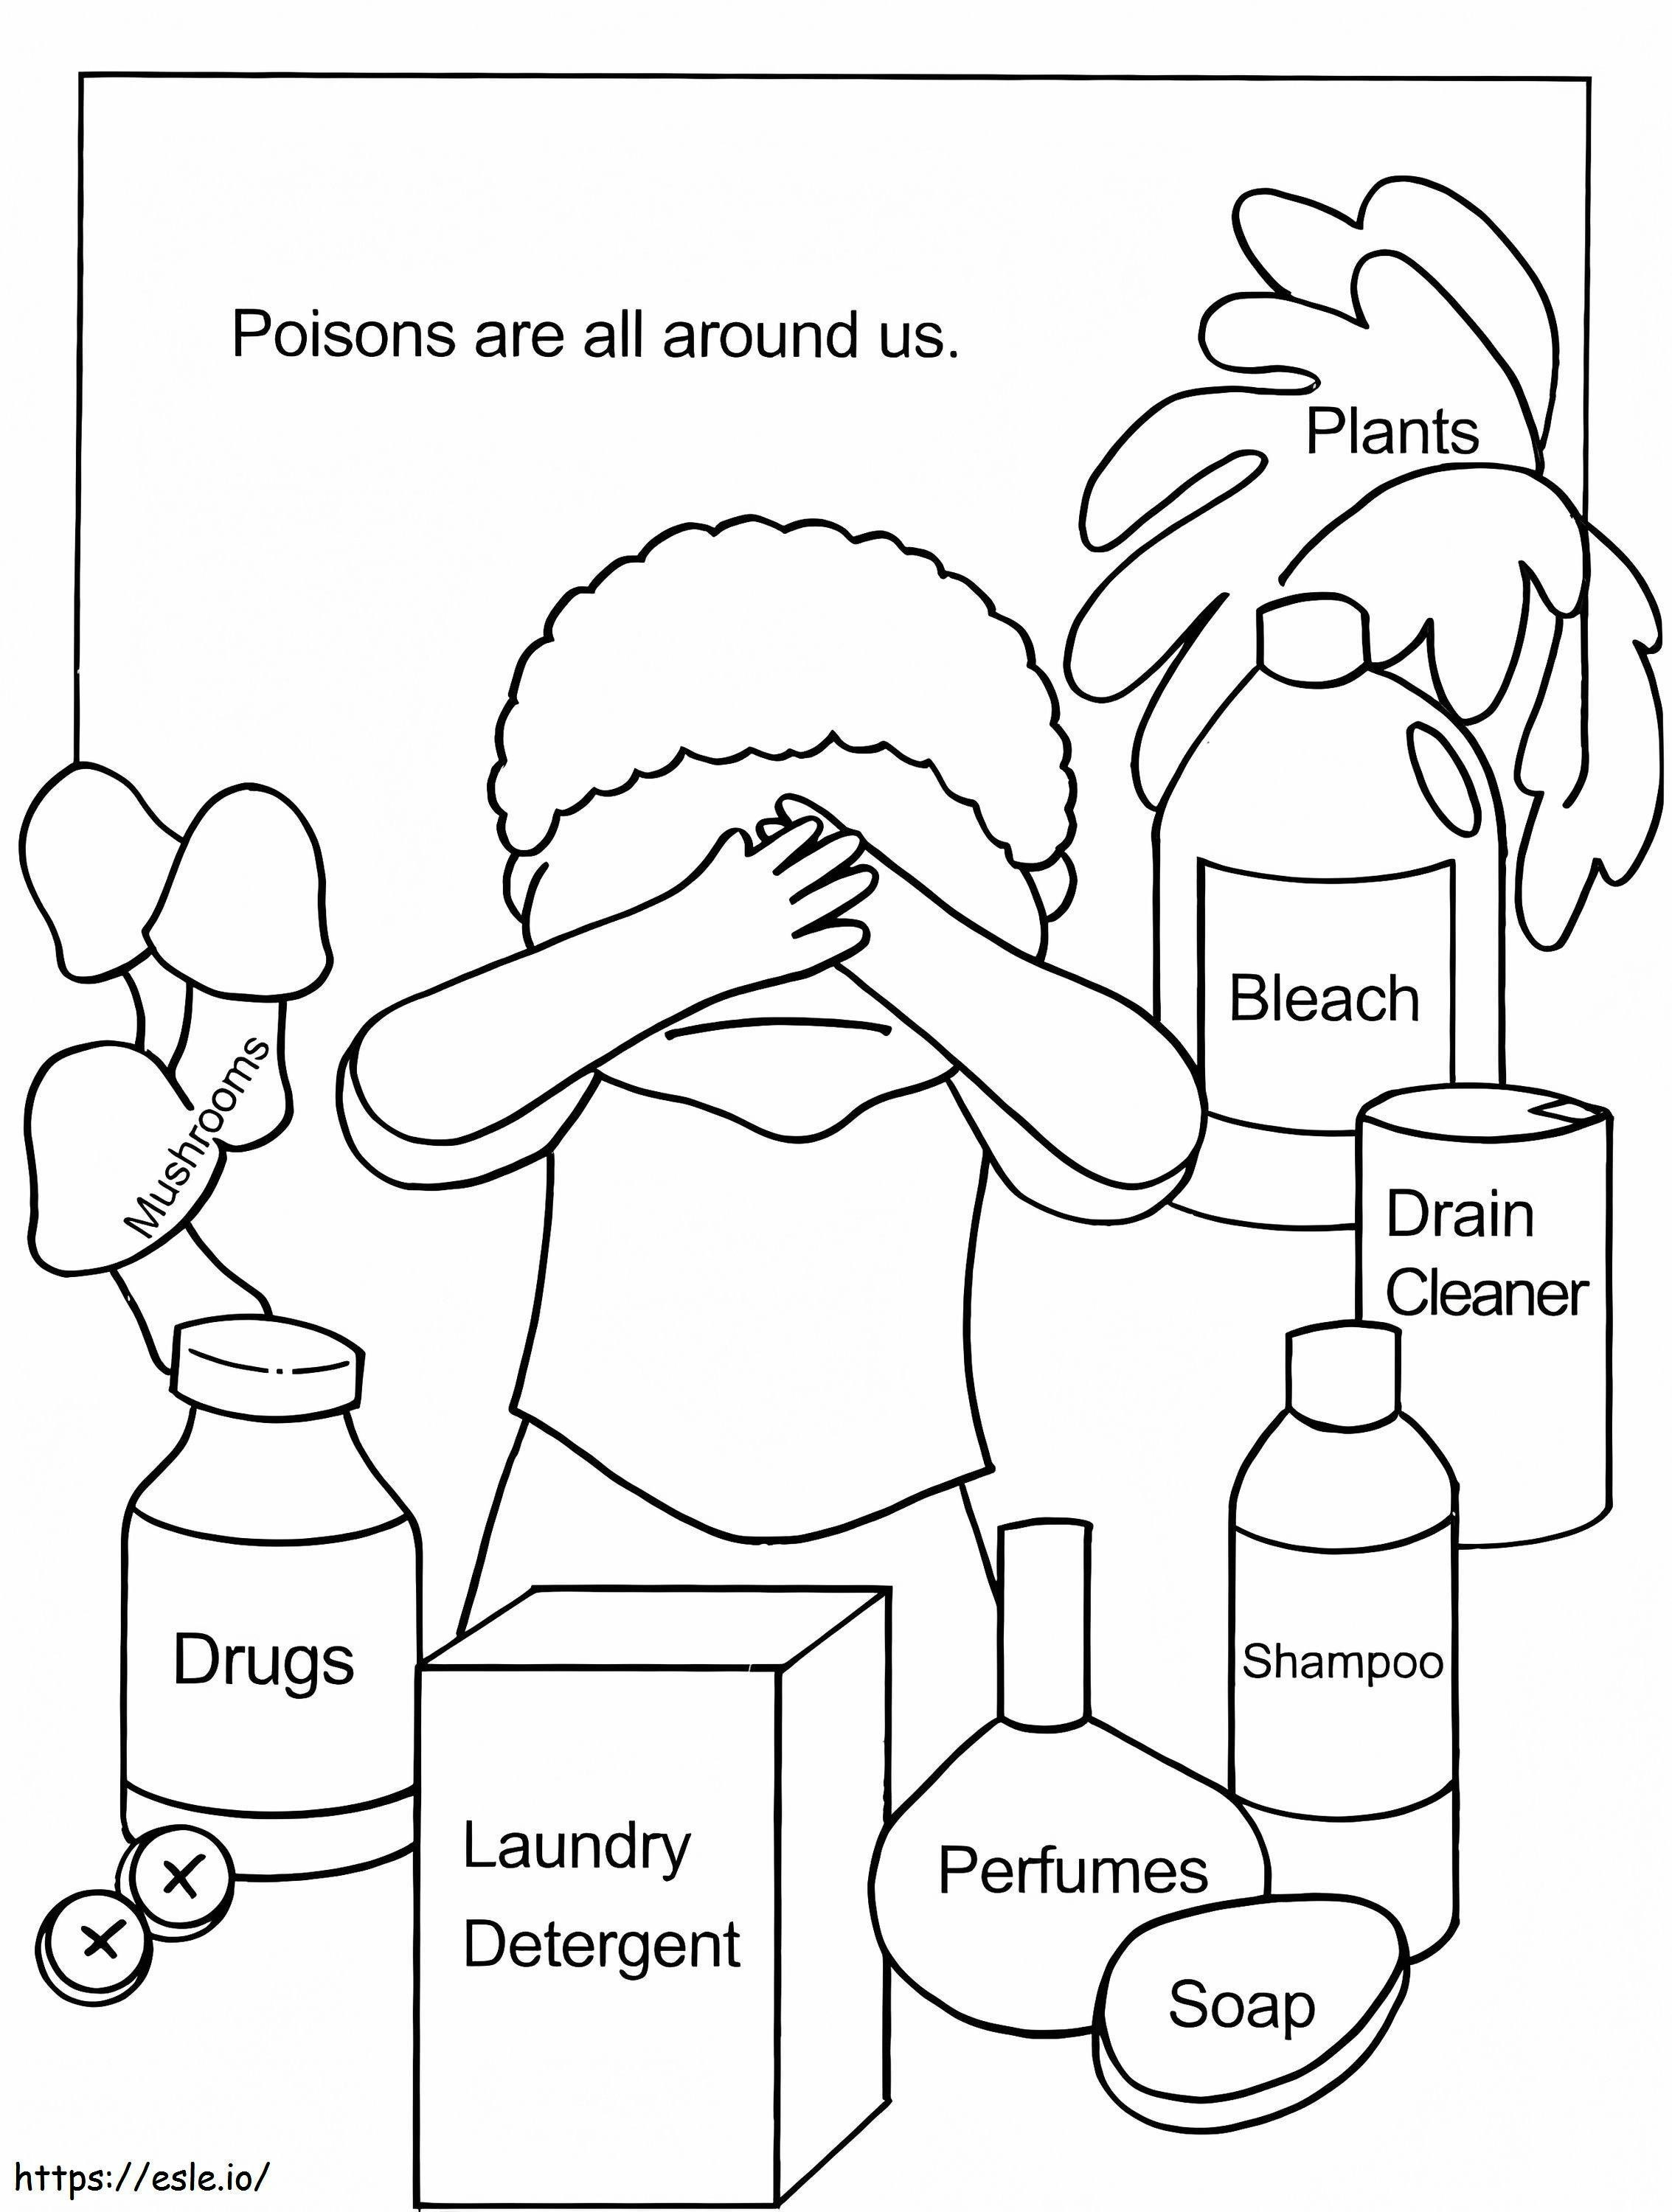 Poisons Are Around Us coloring page